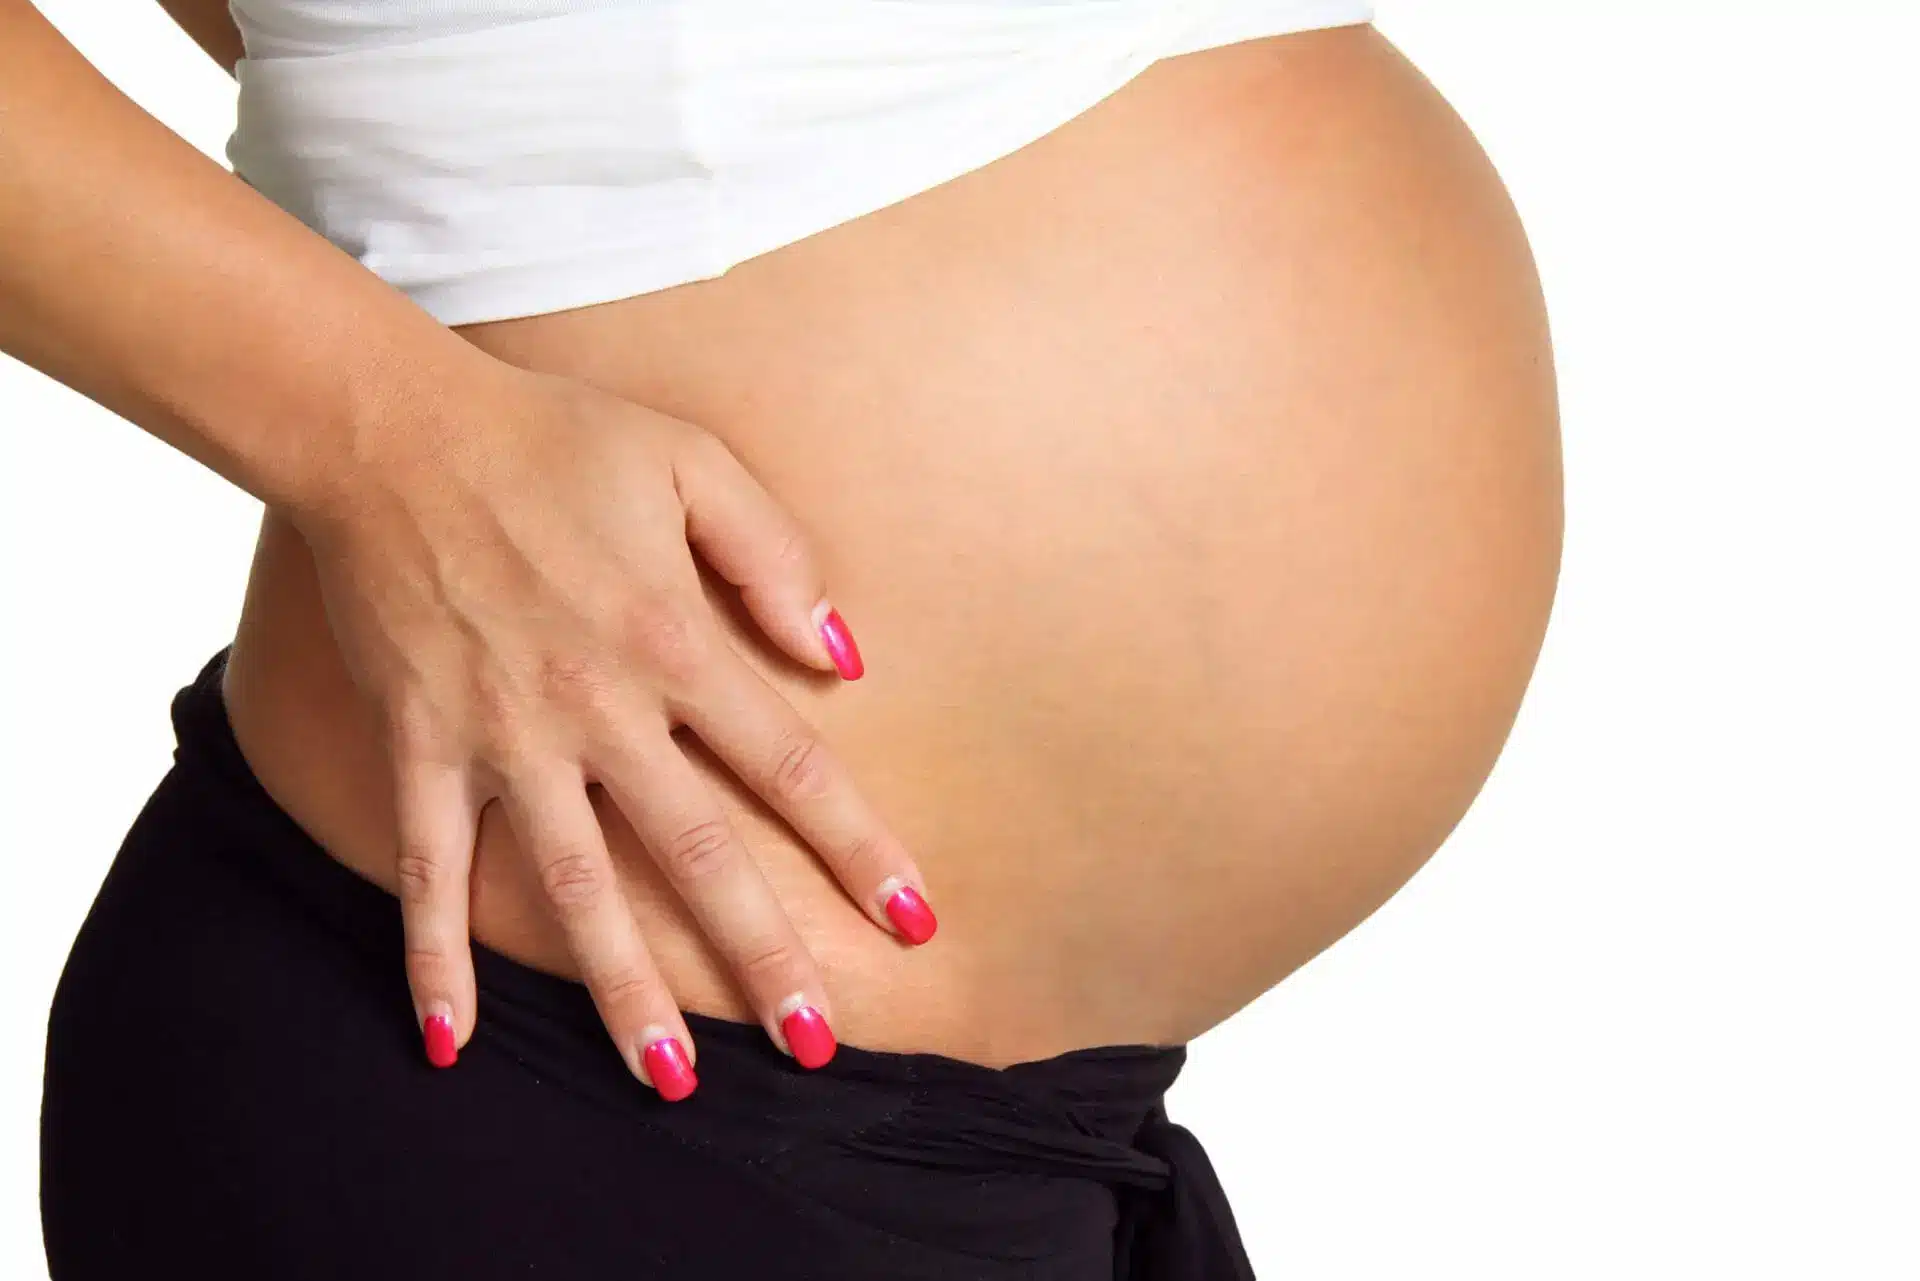 get dip nails done while pregnant